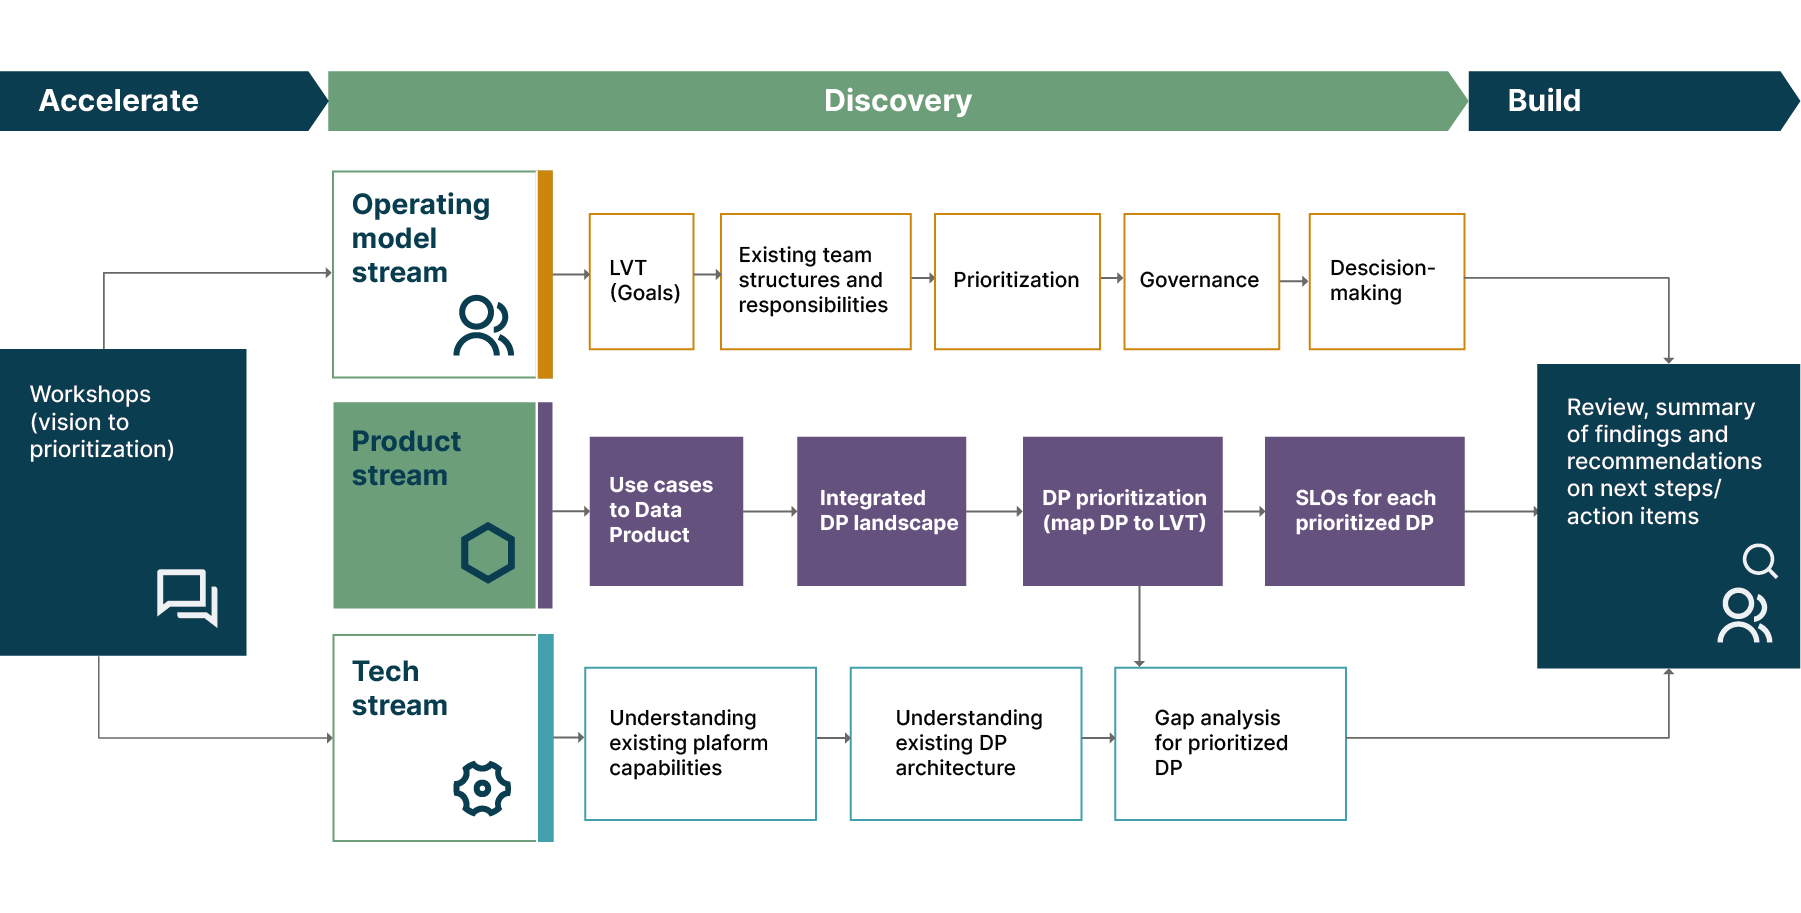 Three-stream discovery process across multiple domains at a major healthcare company. Here the focus is on the product stream.